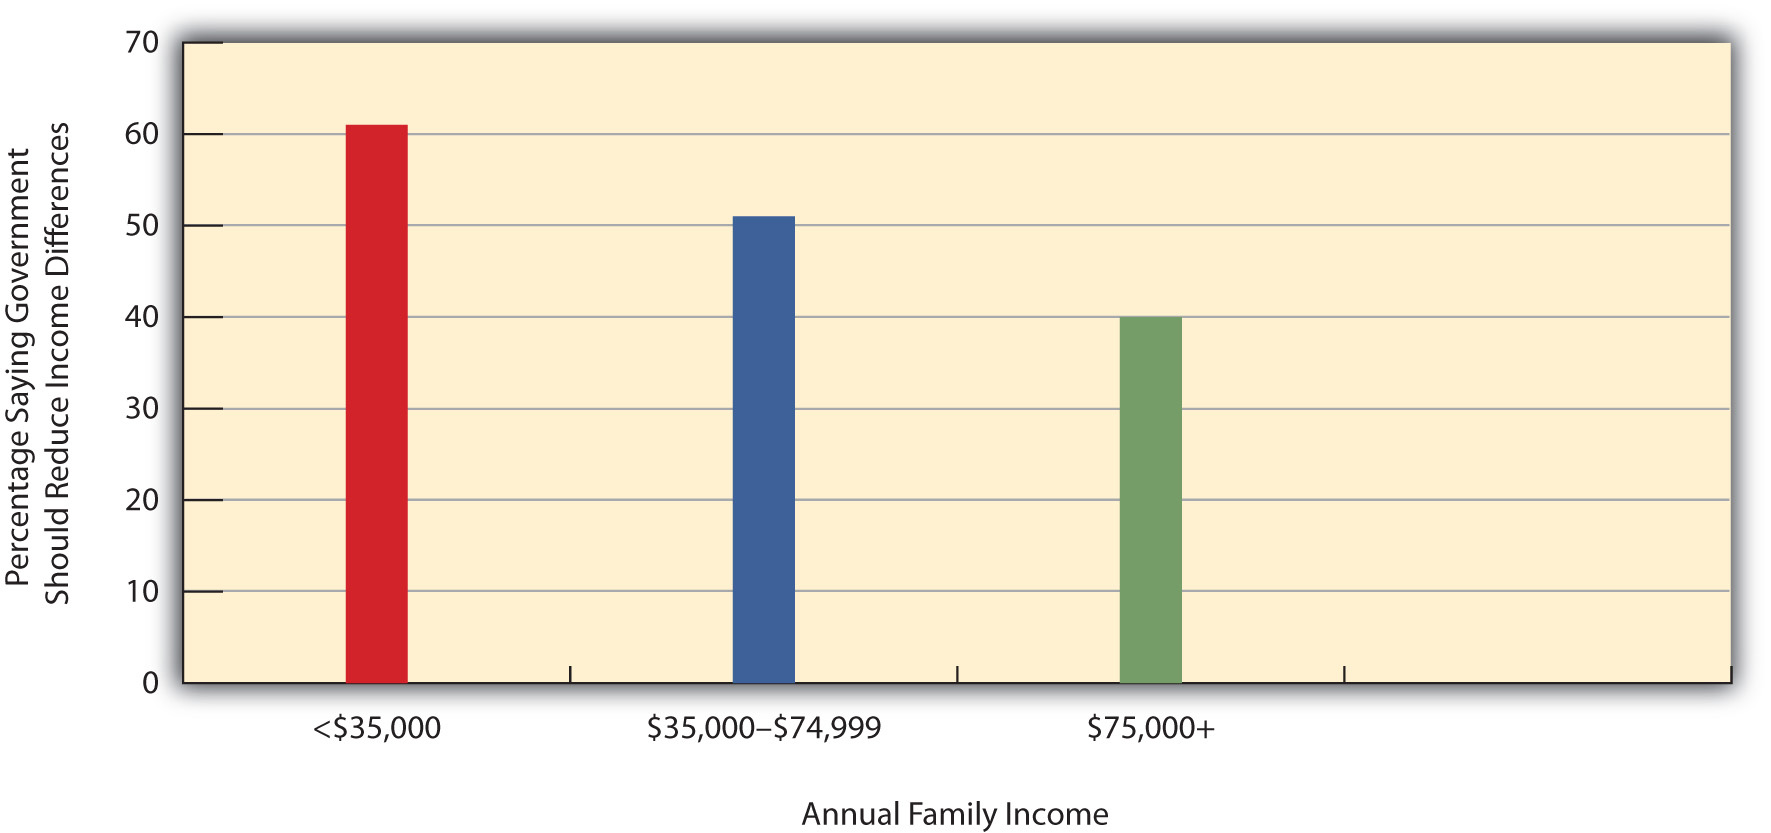 Annual Family Income and Belief That Government